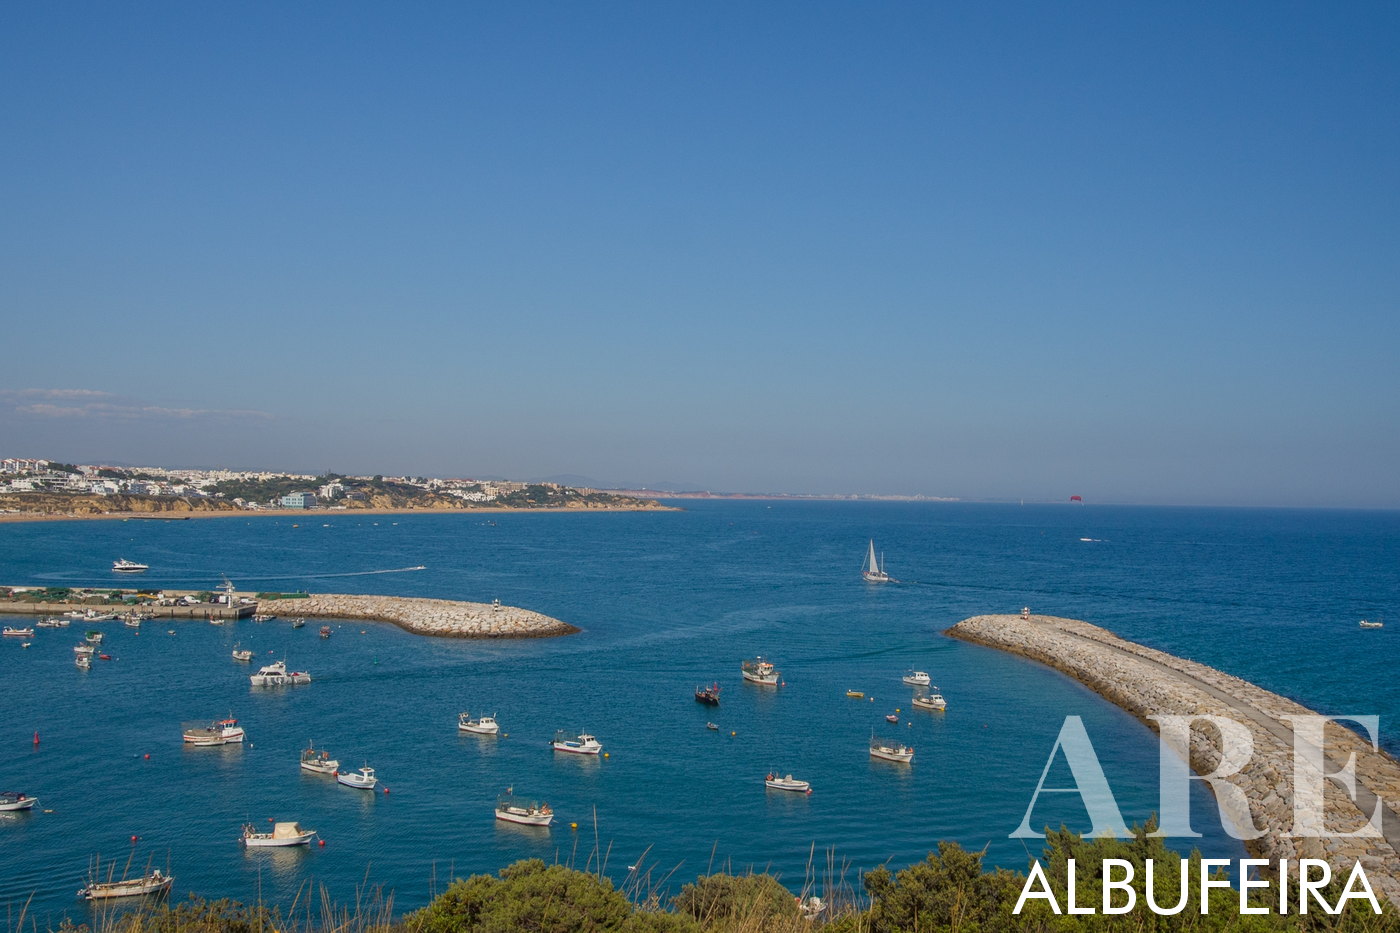 Striking view of the welcoming entrance to Albufeira's lively and picturesque port.